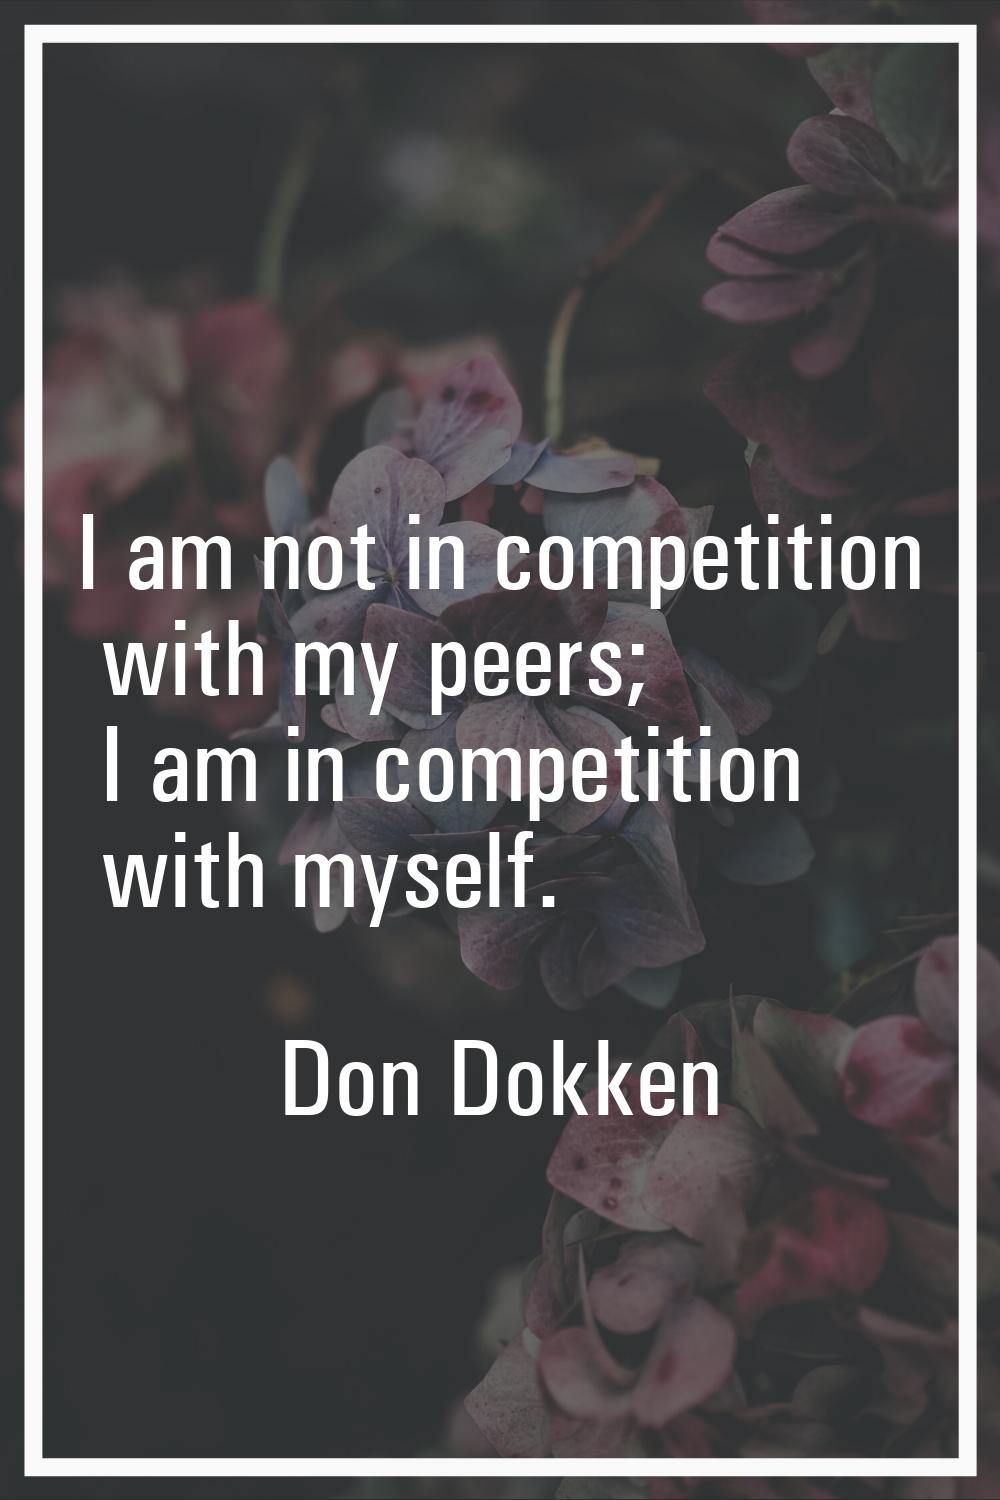 I am not in competition with my peers; I am in competition with myself.